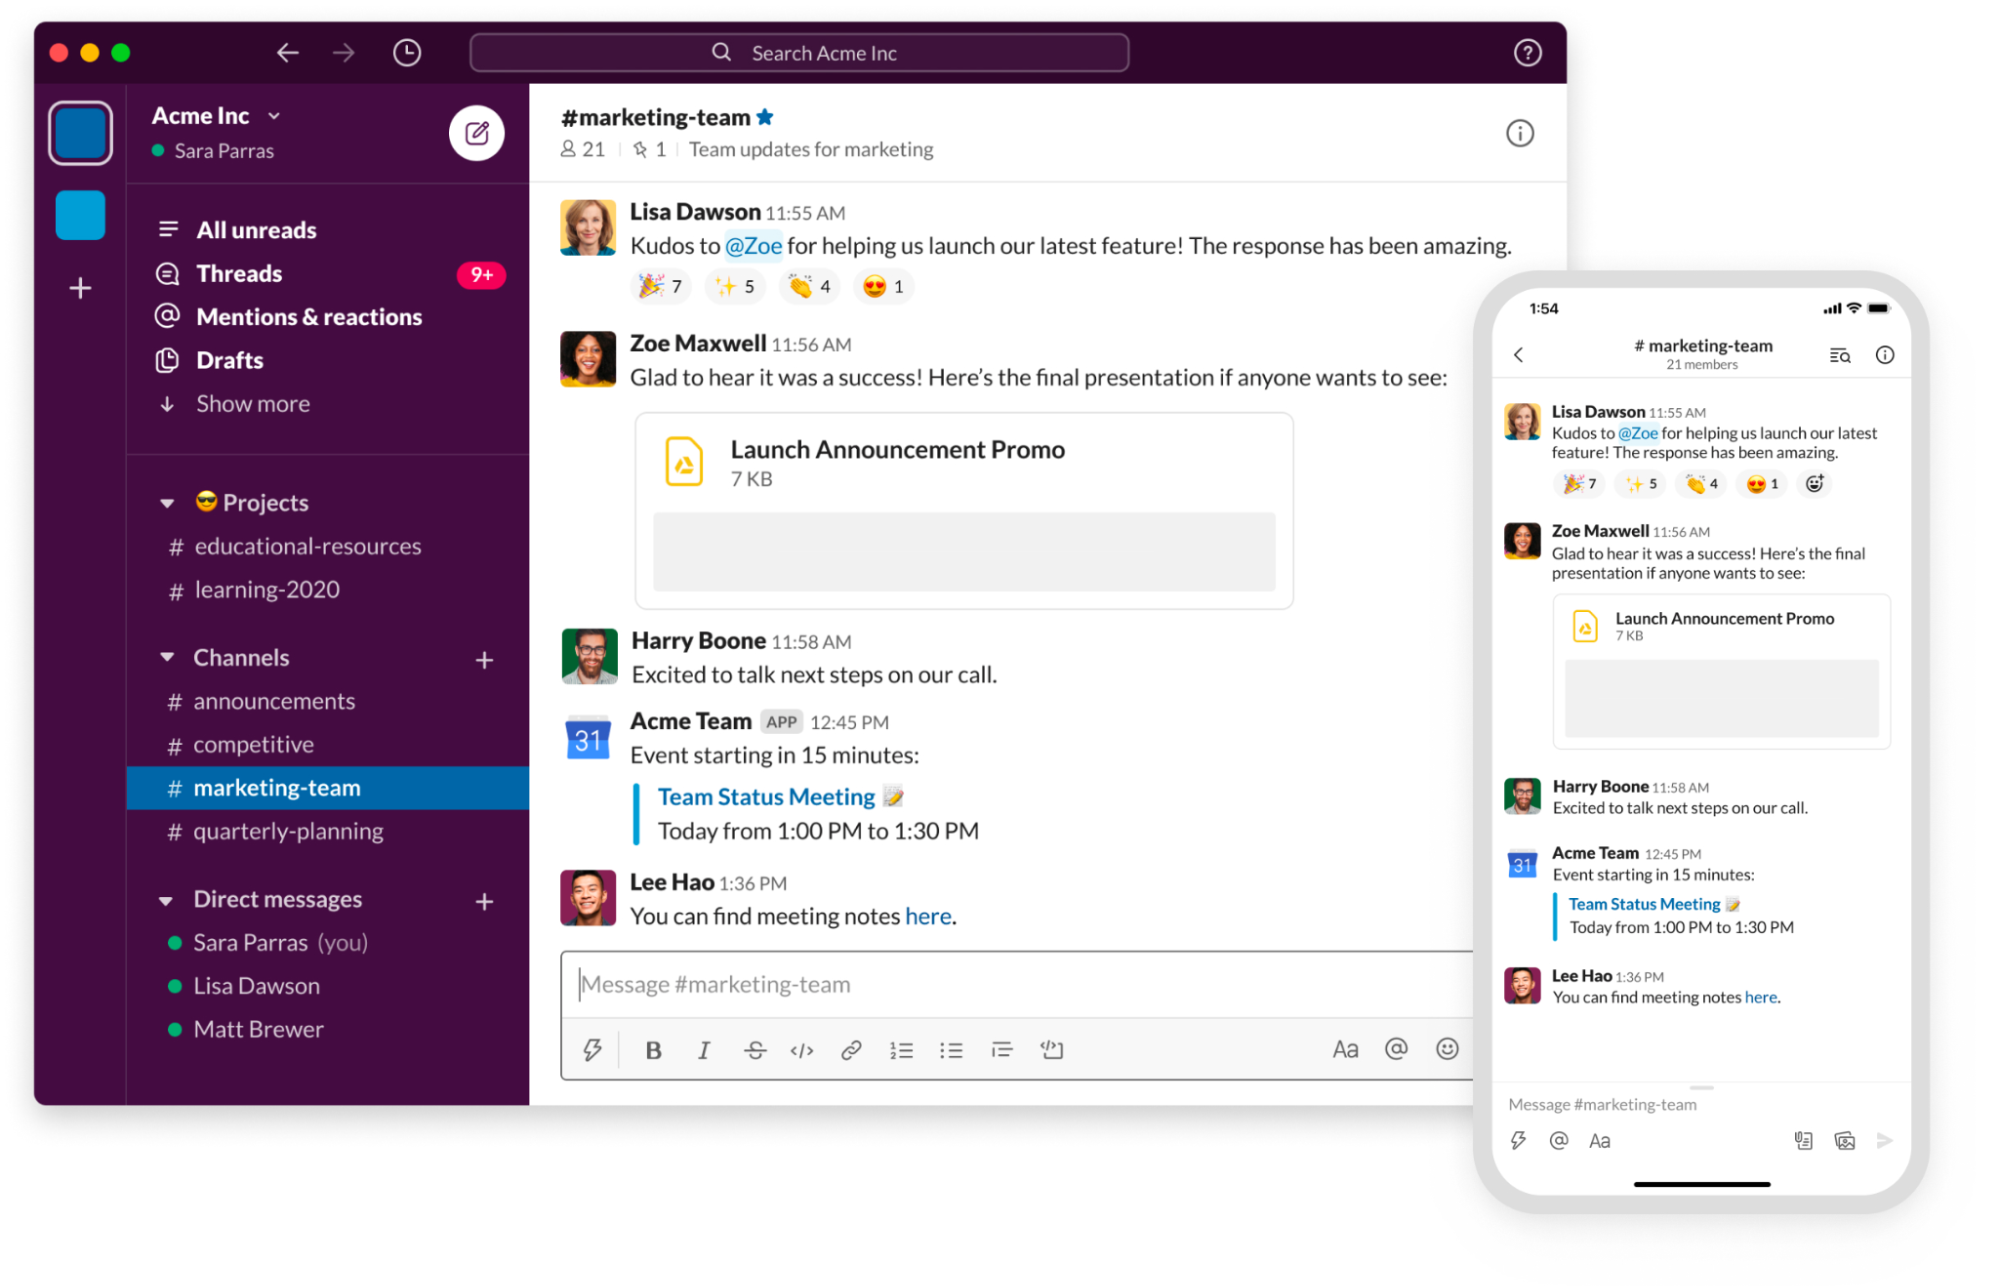 Screenshots of the Slack instance for Acme Inc, including sidebar sections for Projects, Channels, and Direct messages. The channel shown is called #marketing-team. The screenshots show both desktop and mobile versions of Slack.